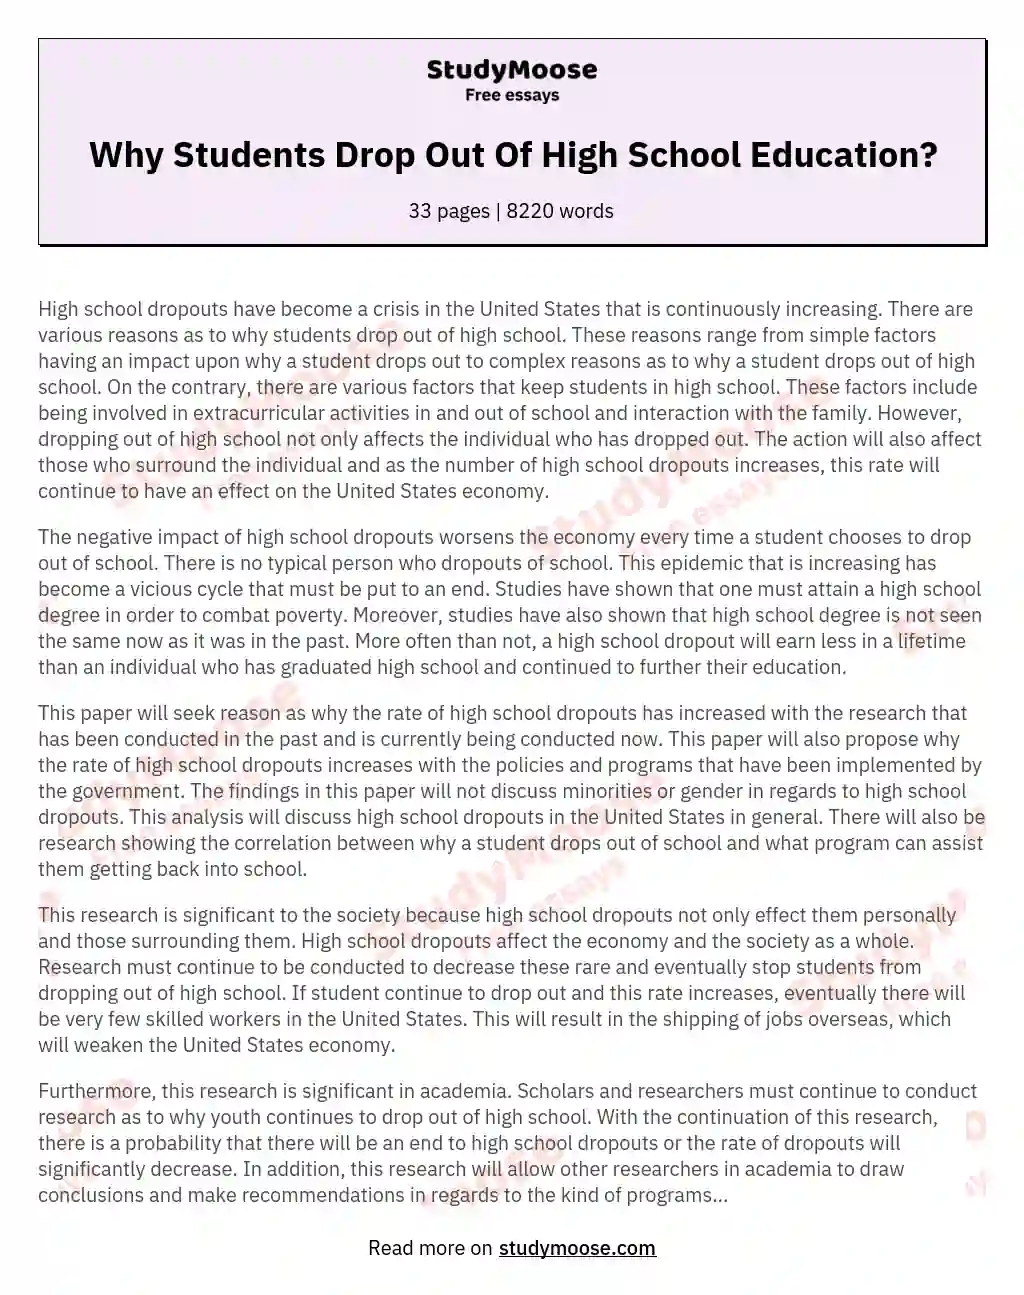 Why Students Drop Out Of High School Education?